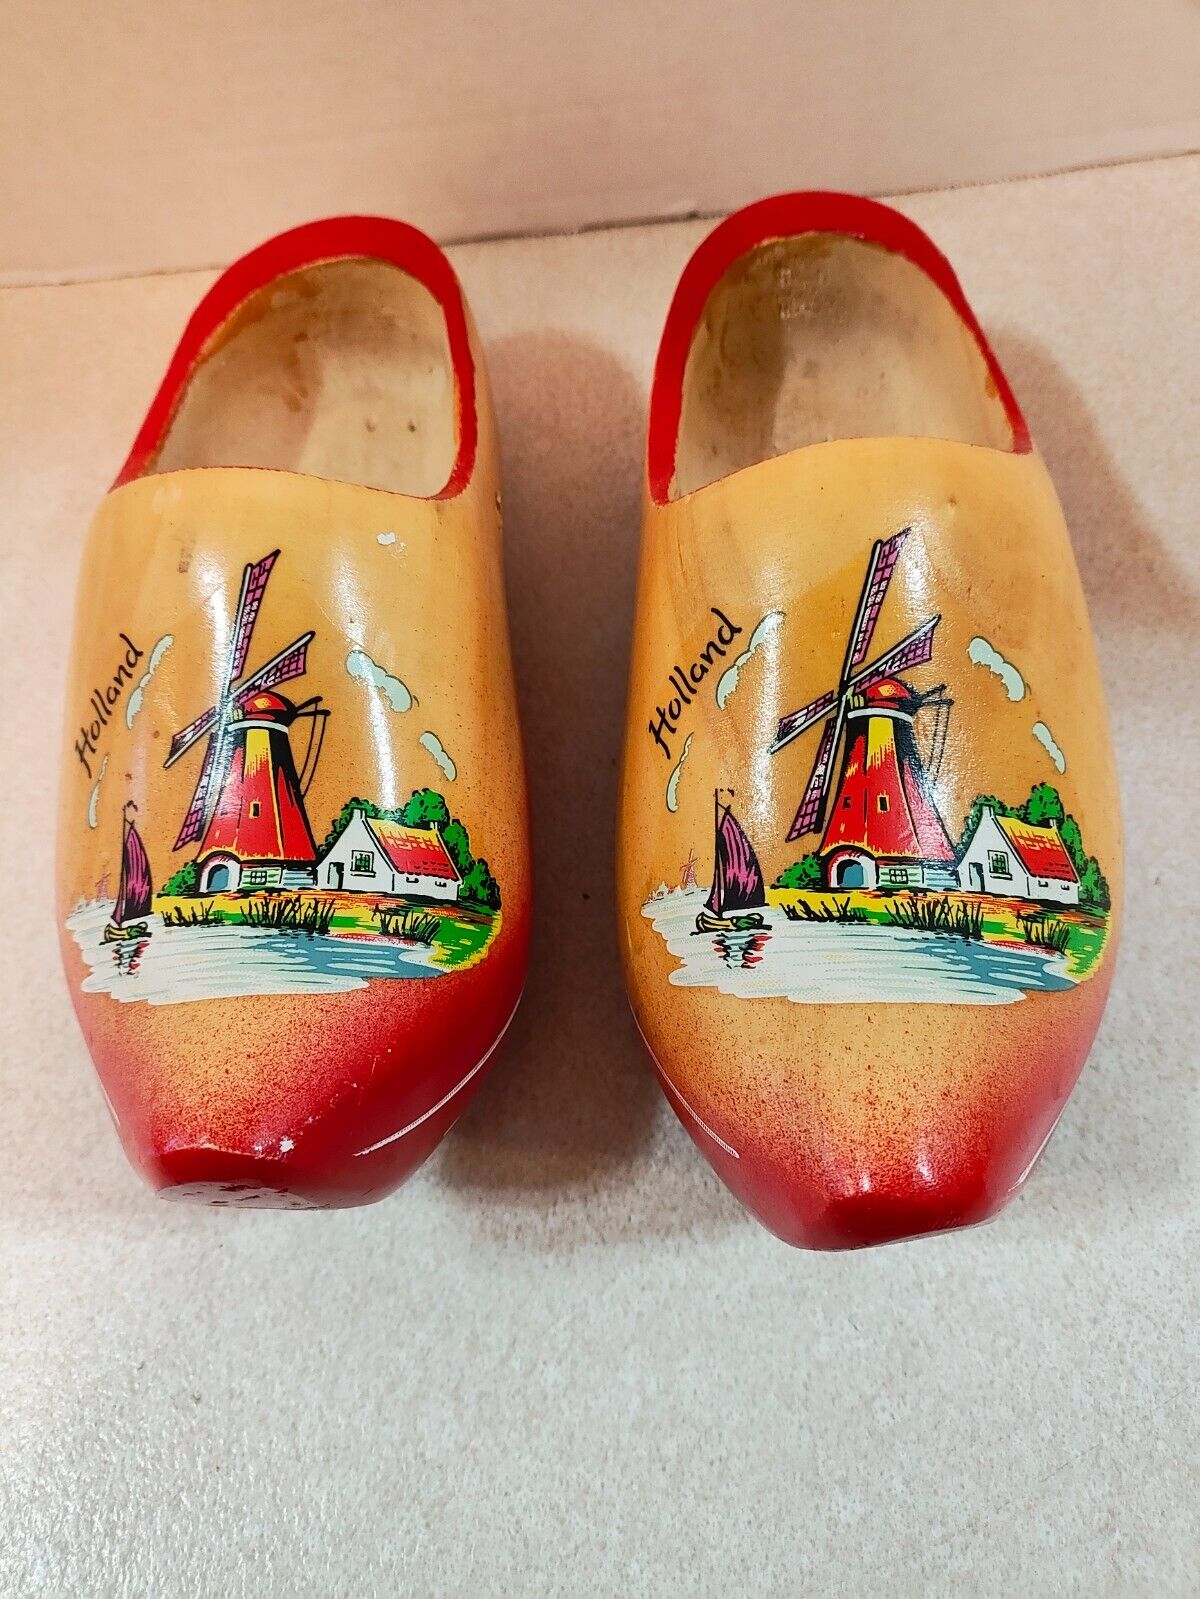 Vintage painted wooden shoes from Holland